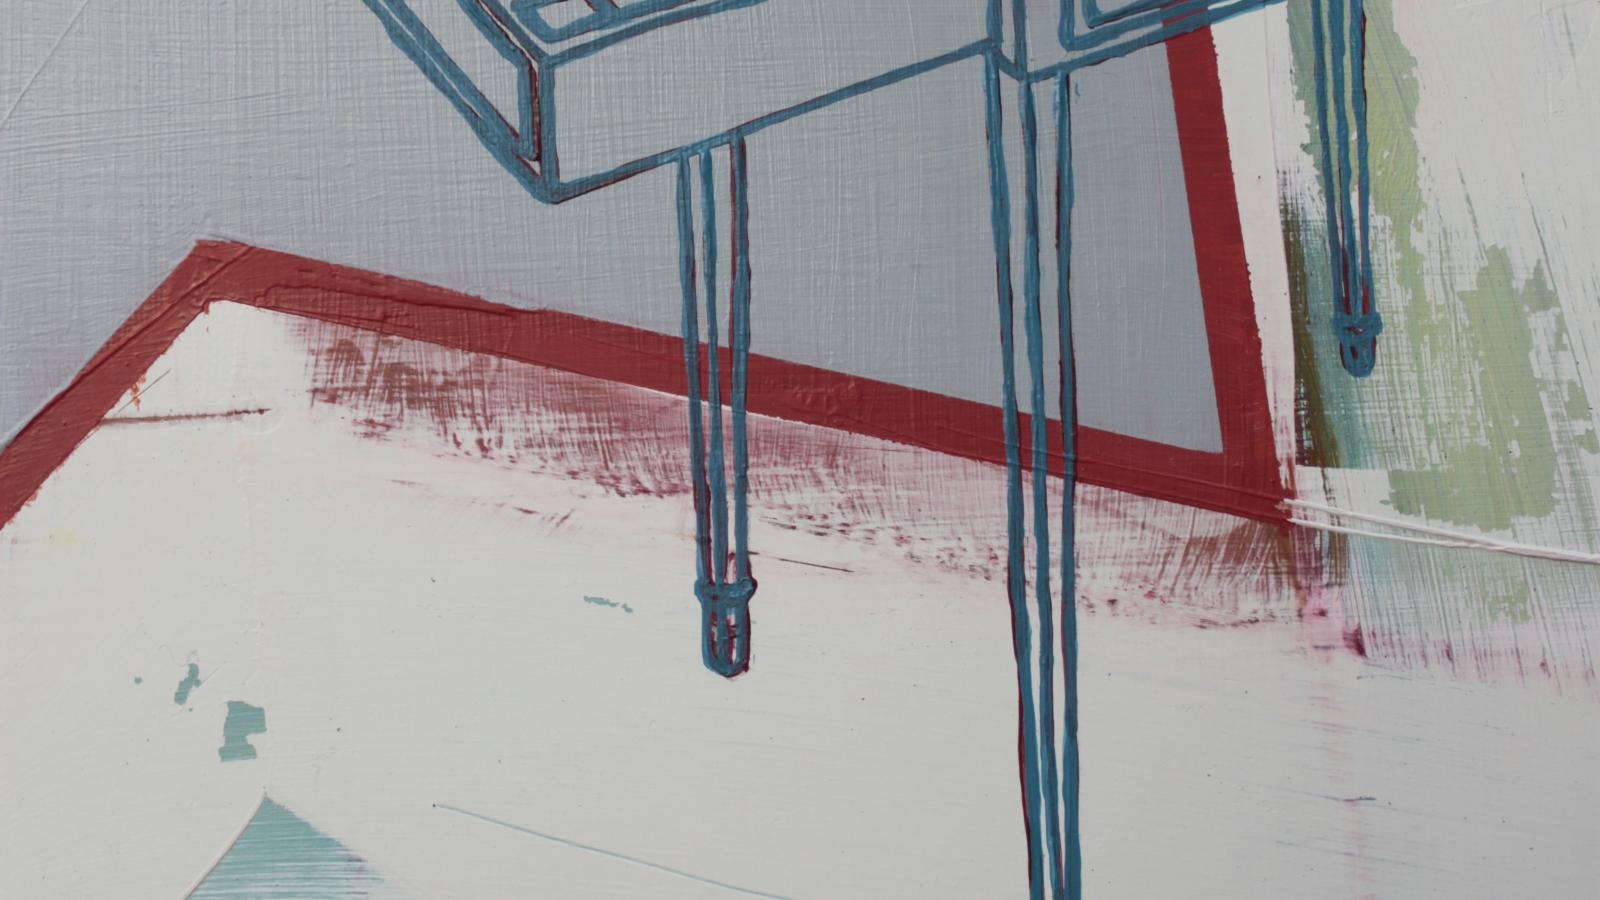 Image of Moyra Derby: "PTS template 6 (detail)", leaning panels, oil on acrylic sheet, 2013